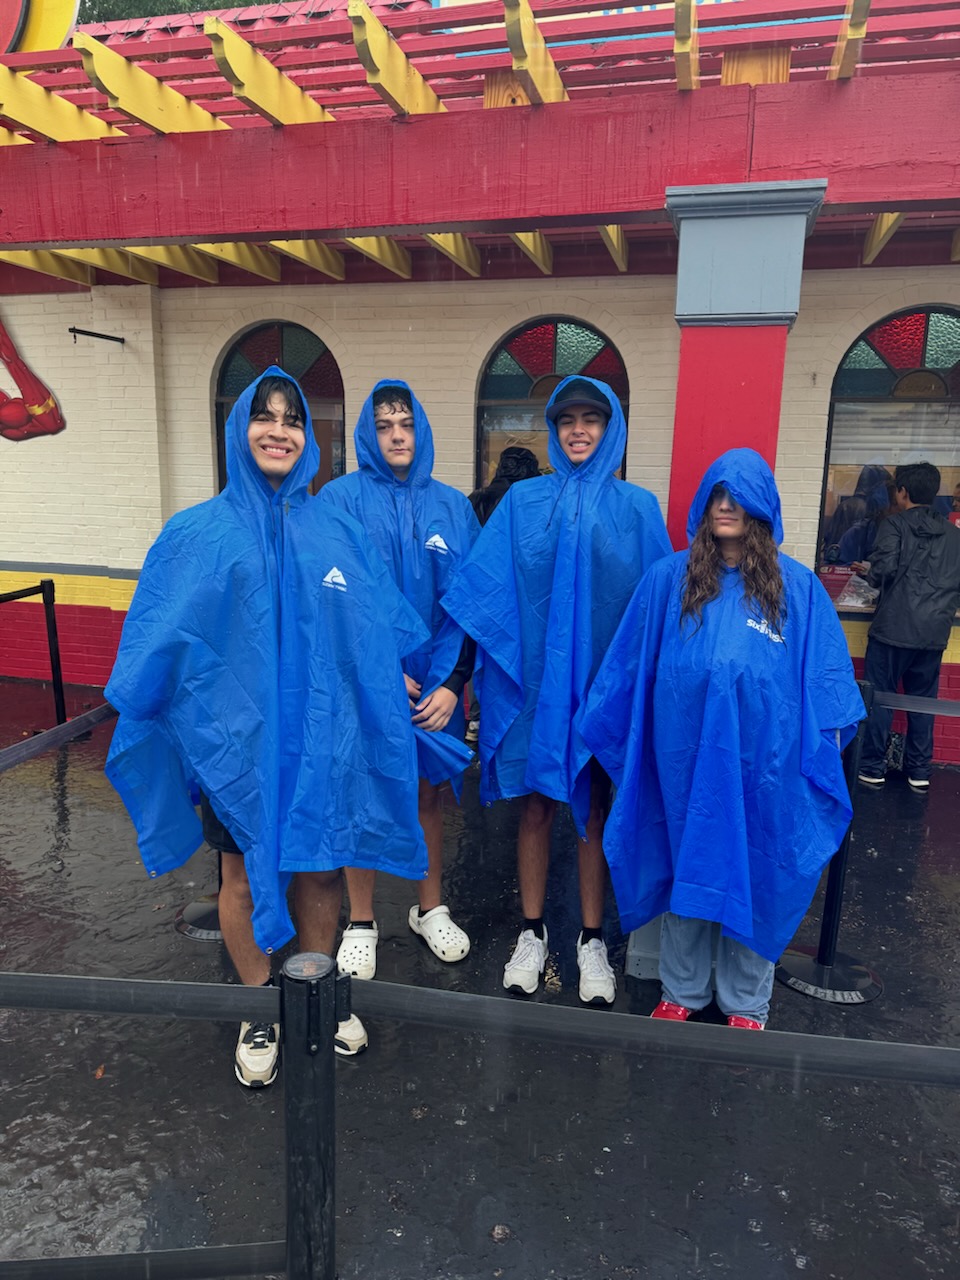 Rainy+Day+Dampens+Six+Flags+Adventure%2C+But+Spirits+Remain+High